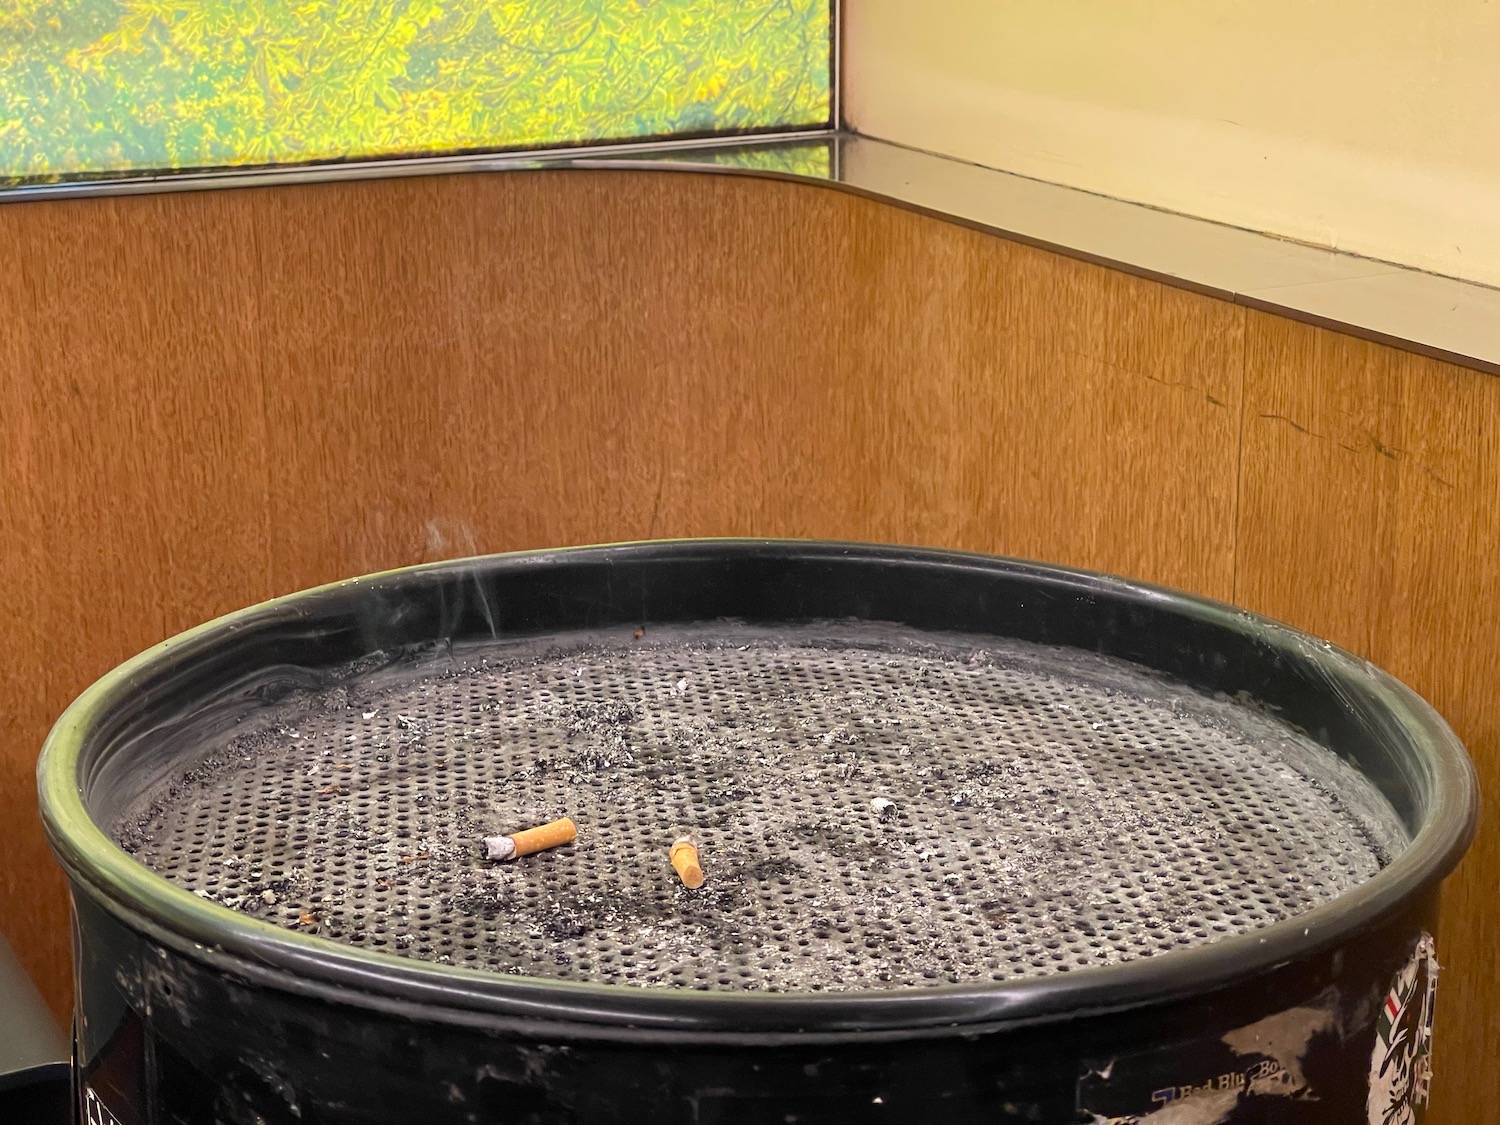 a cigarette butts on a black round ashtray